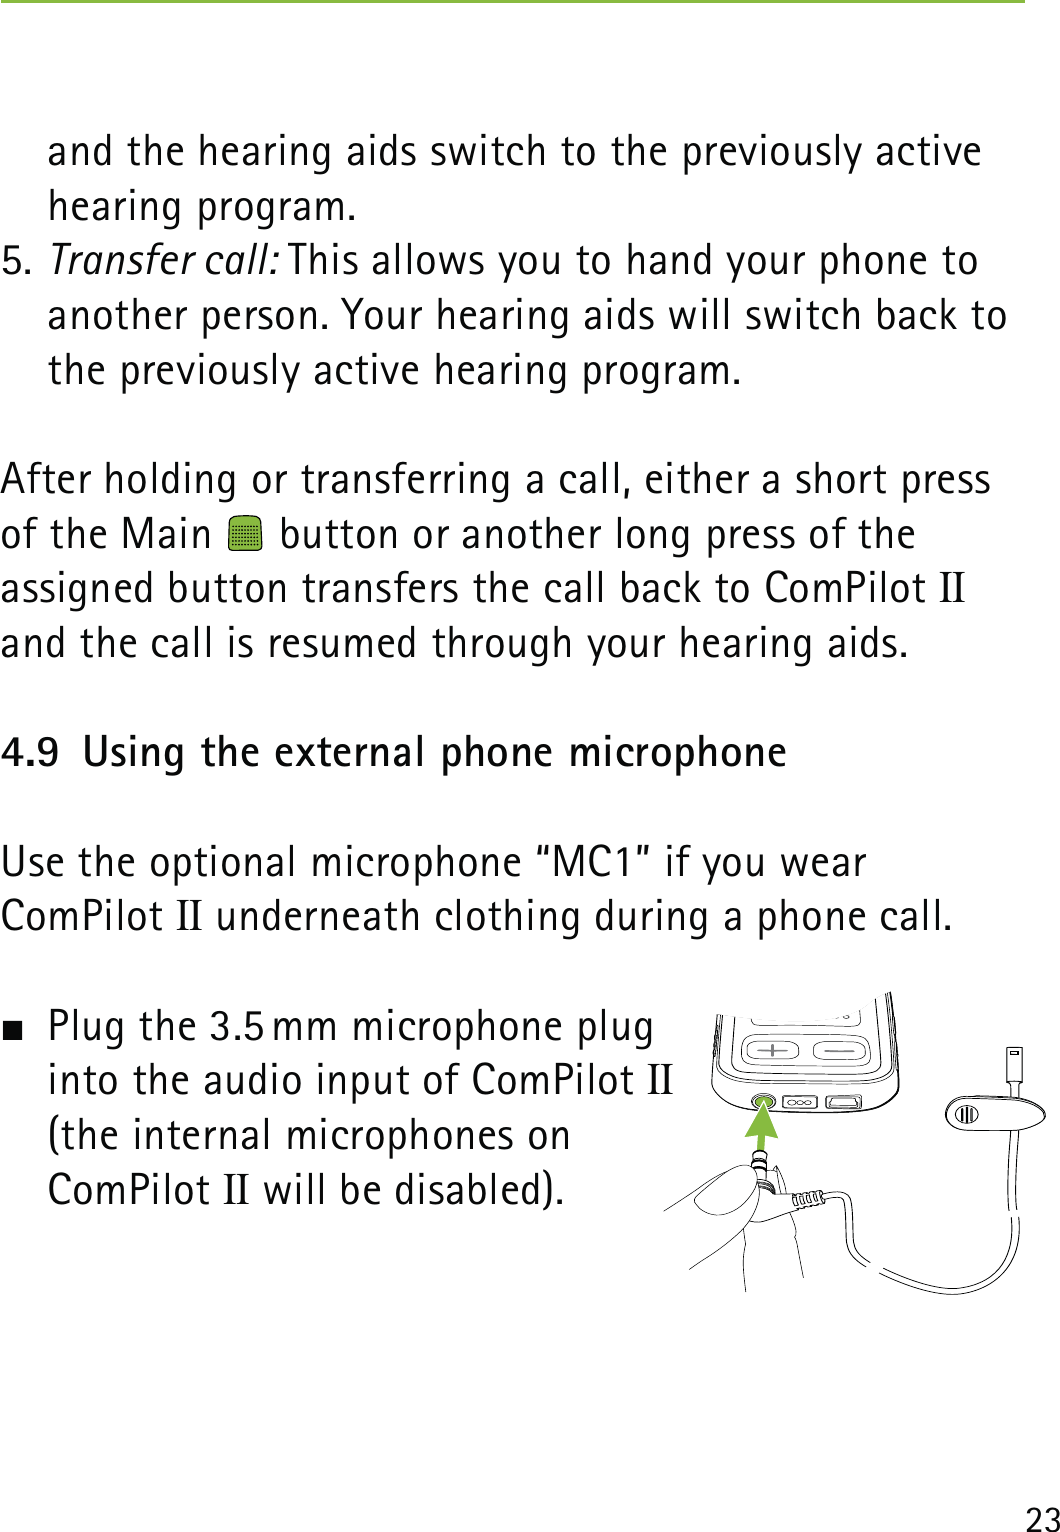 23and the hearing aids switch to the previously active hearing program. 5. Transfer call: This allows you to hand your phone to another person. Your hearing aids will switch back to the previously active hearing program.After holding or transferring a call, either a short press of the Main   button or another long press of the  assigned button transfers the call back to ComPilot II and the call is resumed through your hearing aids.4.9  Using the external phone microphoneUse the optional microphone “MC1” if you wear  ComPilot II underneath clothing during a phone call.  Plug the 3.5 mm microphone plug  into the audio input of ComPilot II (the internal microphones on  ComPilot II will be disabled).